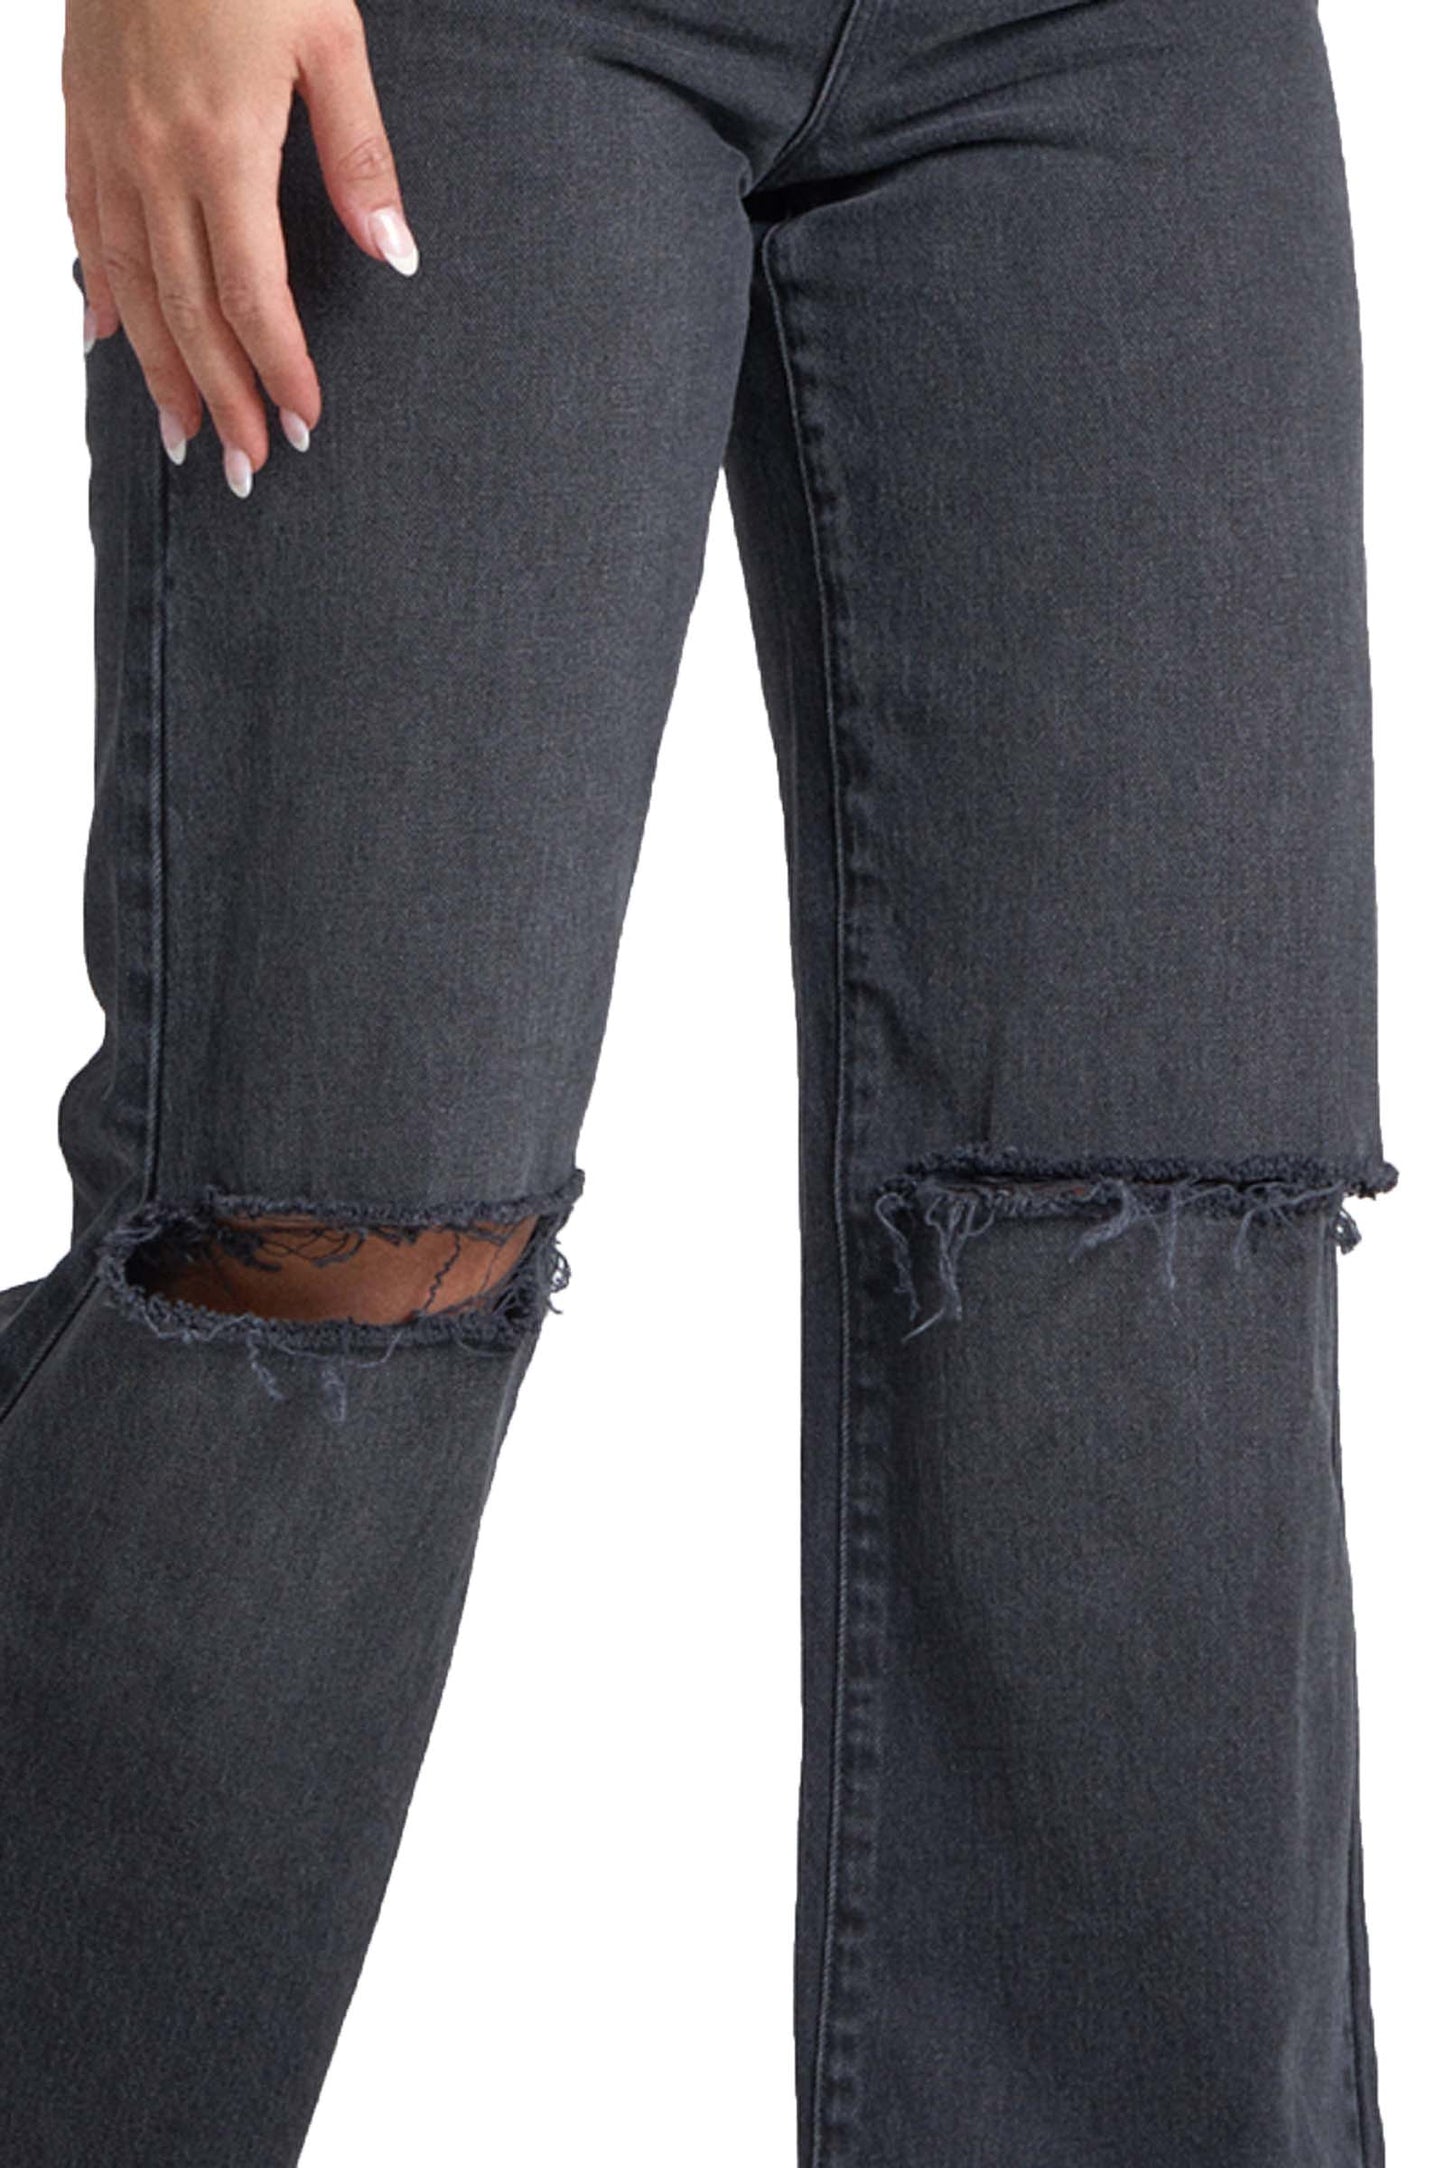 Abrand Jeans A 94 High & Wide Rip Denim Jeans in Cindy